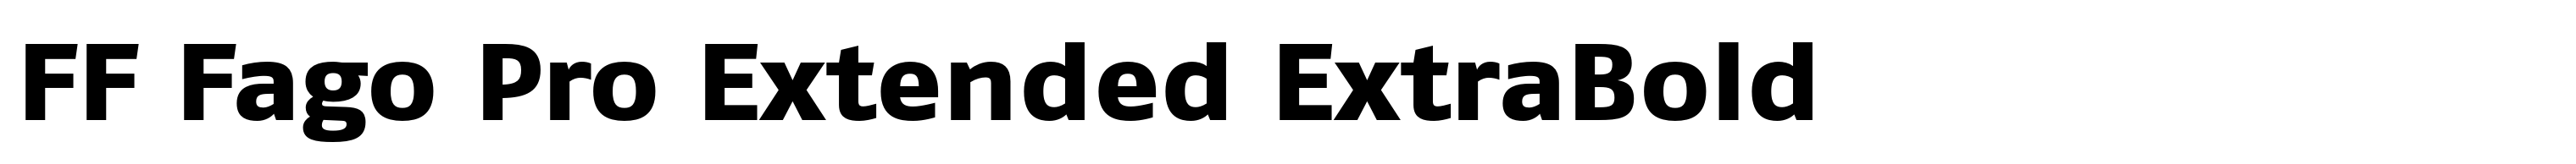 FF Fago Pro Extended ExtraBold